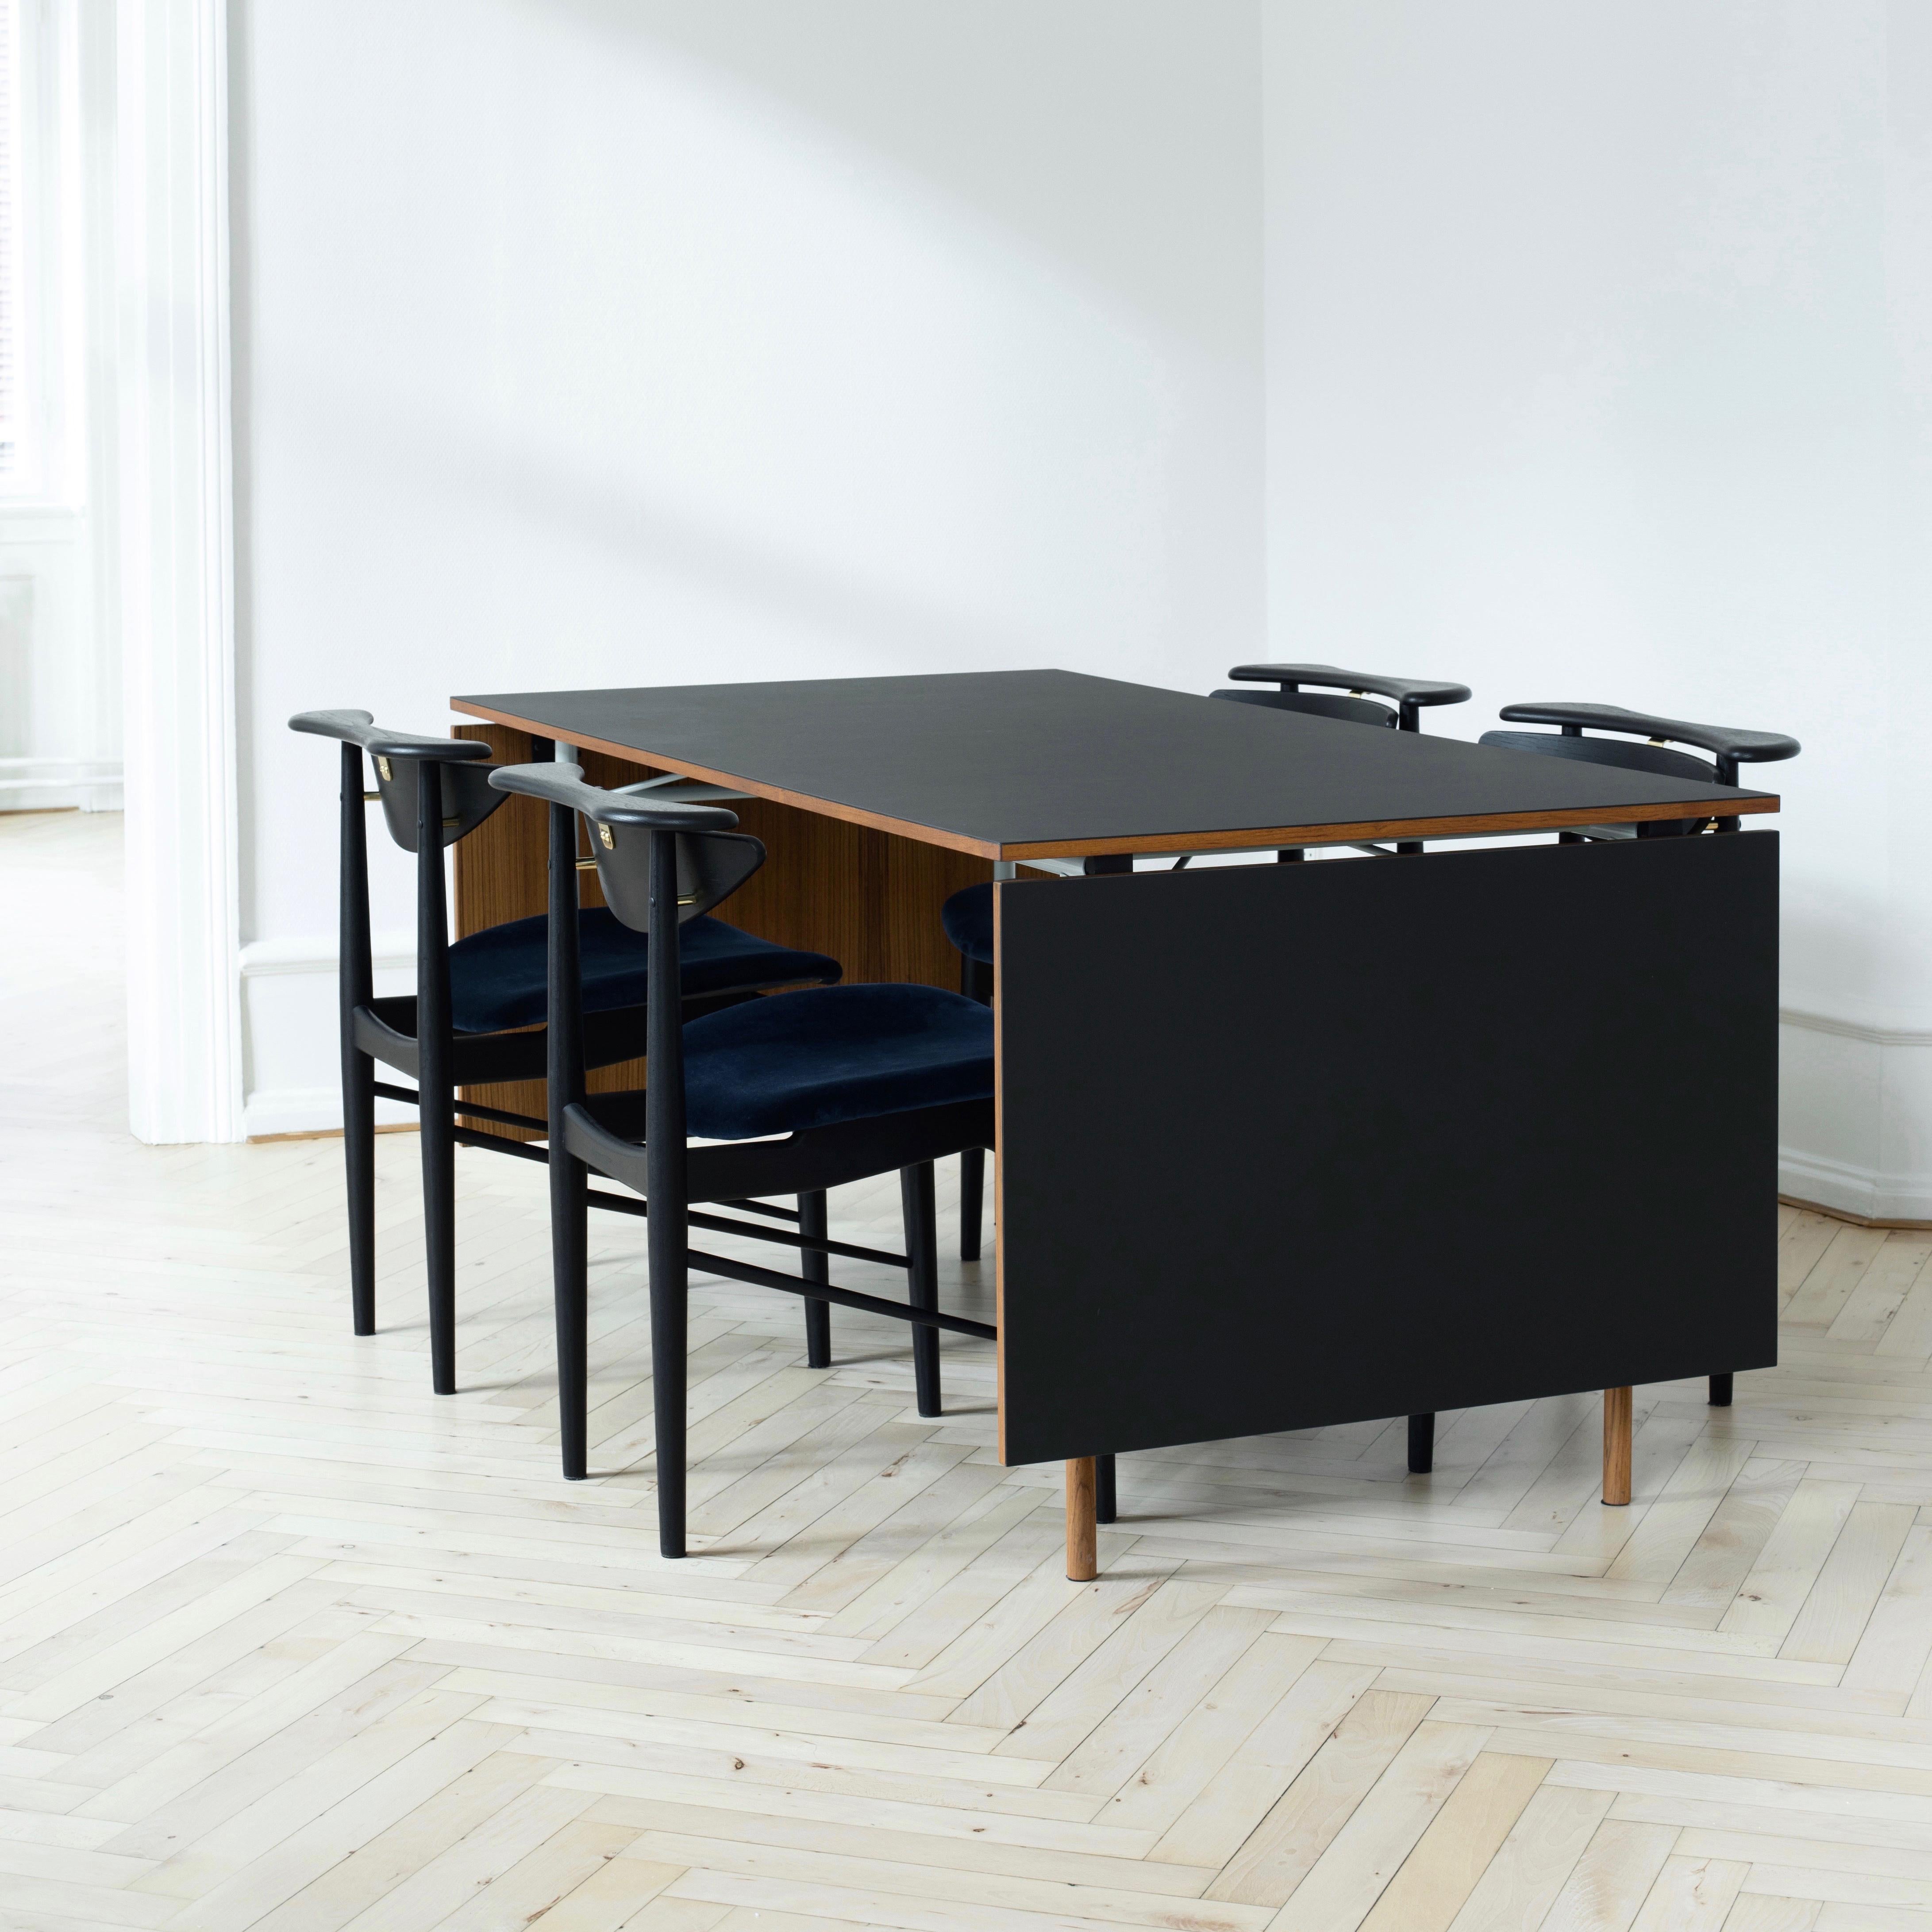 Finn Juhl Nyhavn Dining Table with Two Drop Leaves, Lino and Wood 2